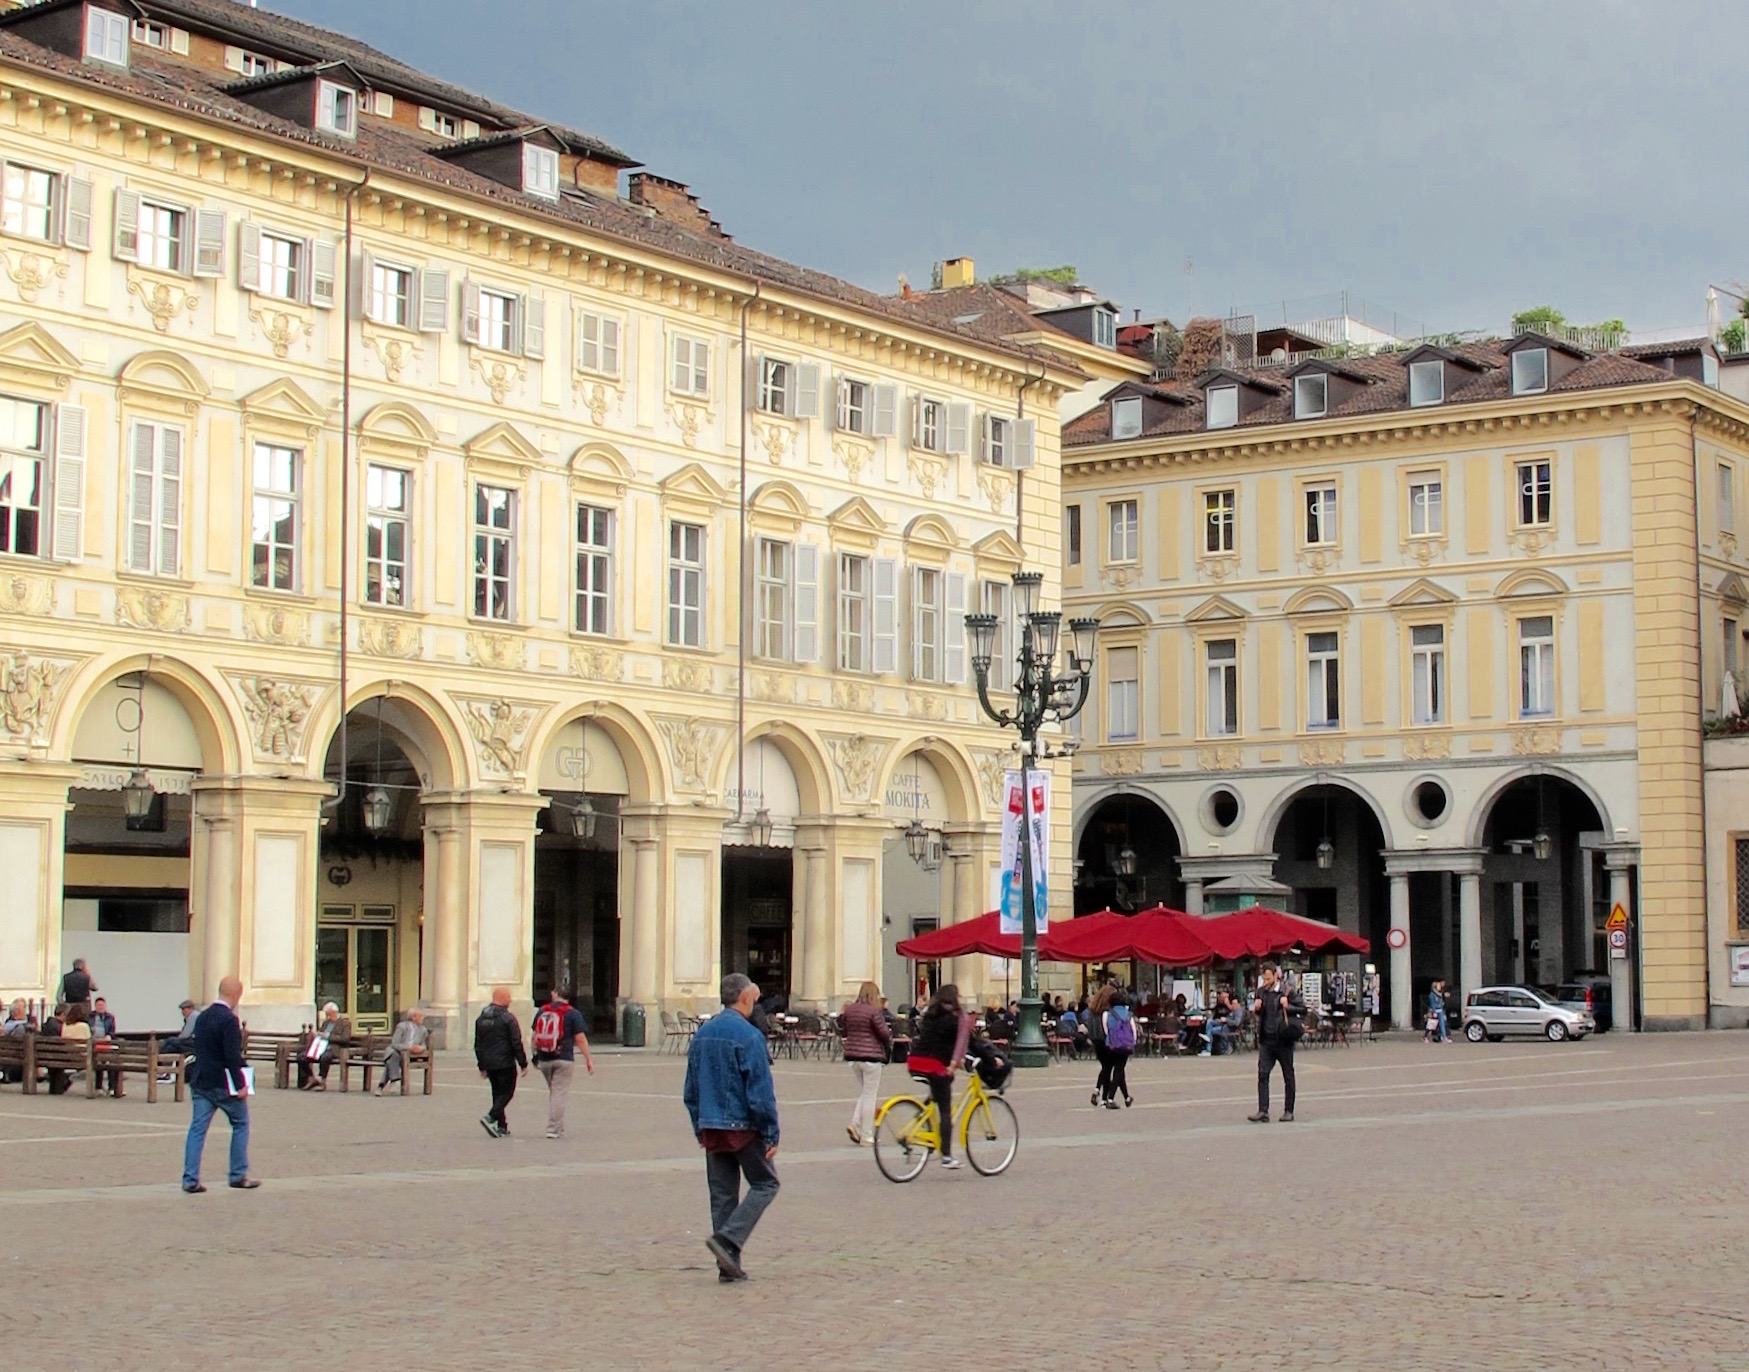 Pretty plazas, lively cafes and Baroque buildings are typical of Torino. Photo by Marla Norman.